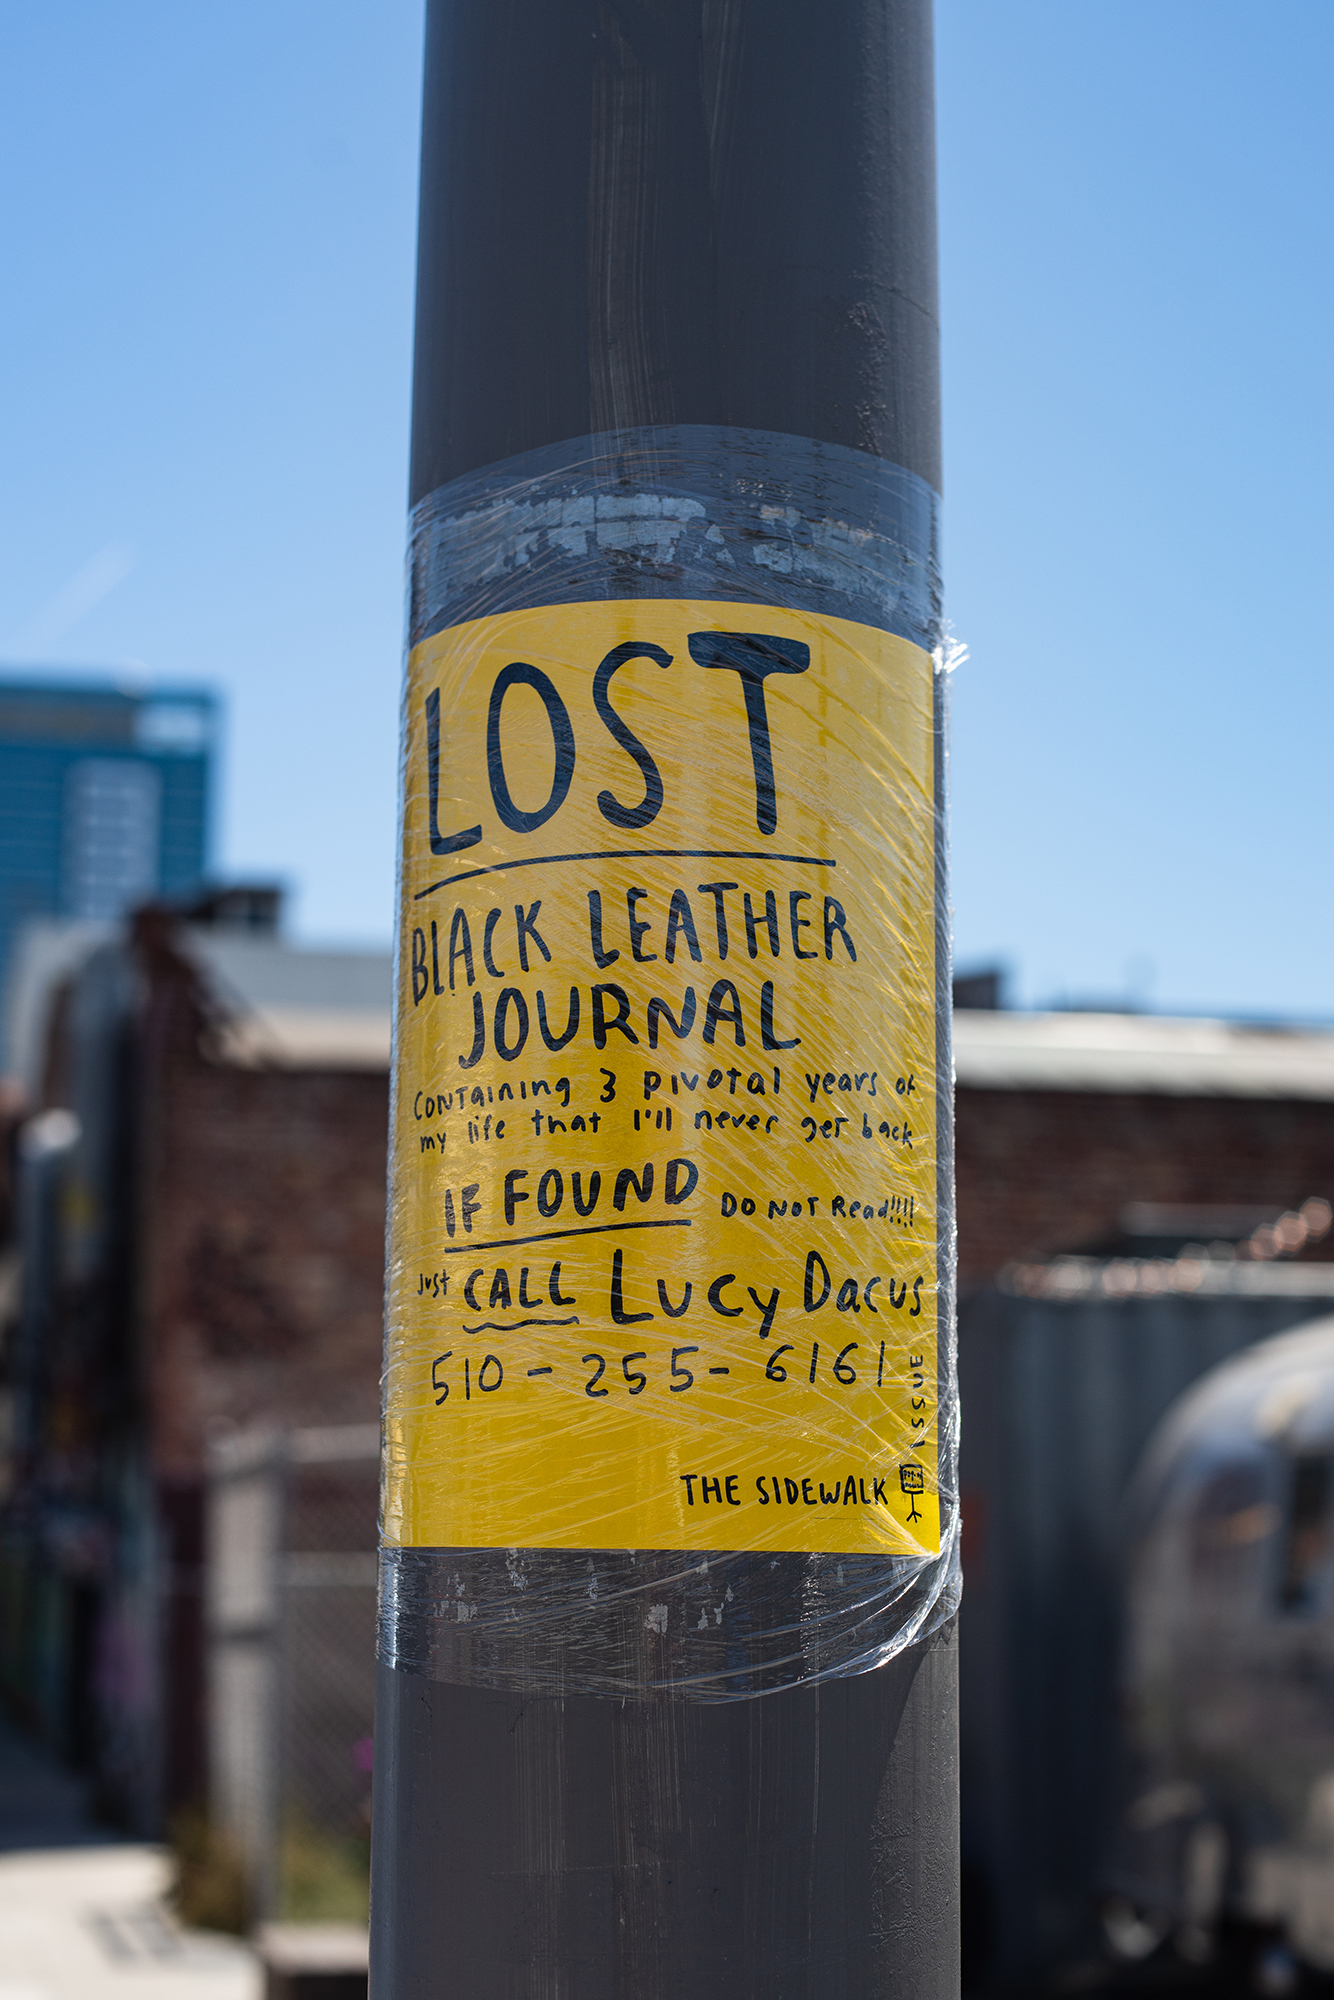 Image of a lost item flyer